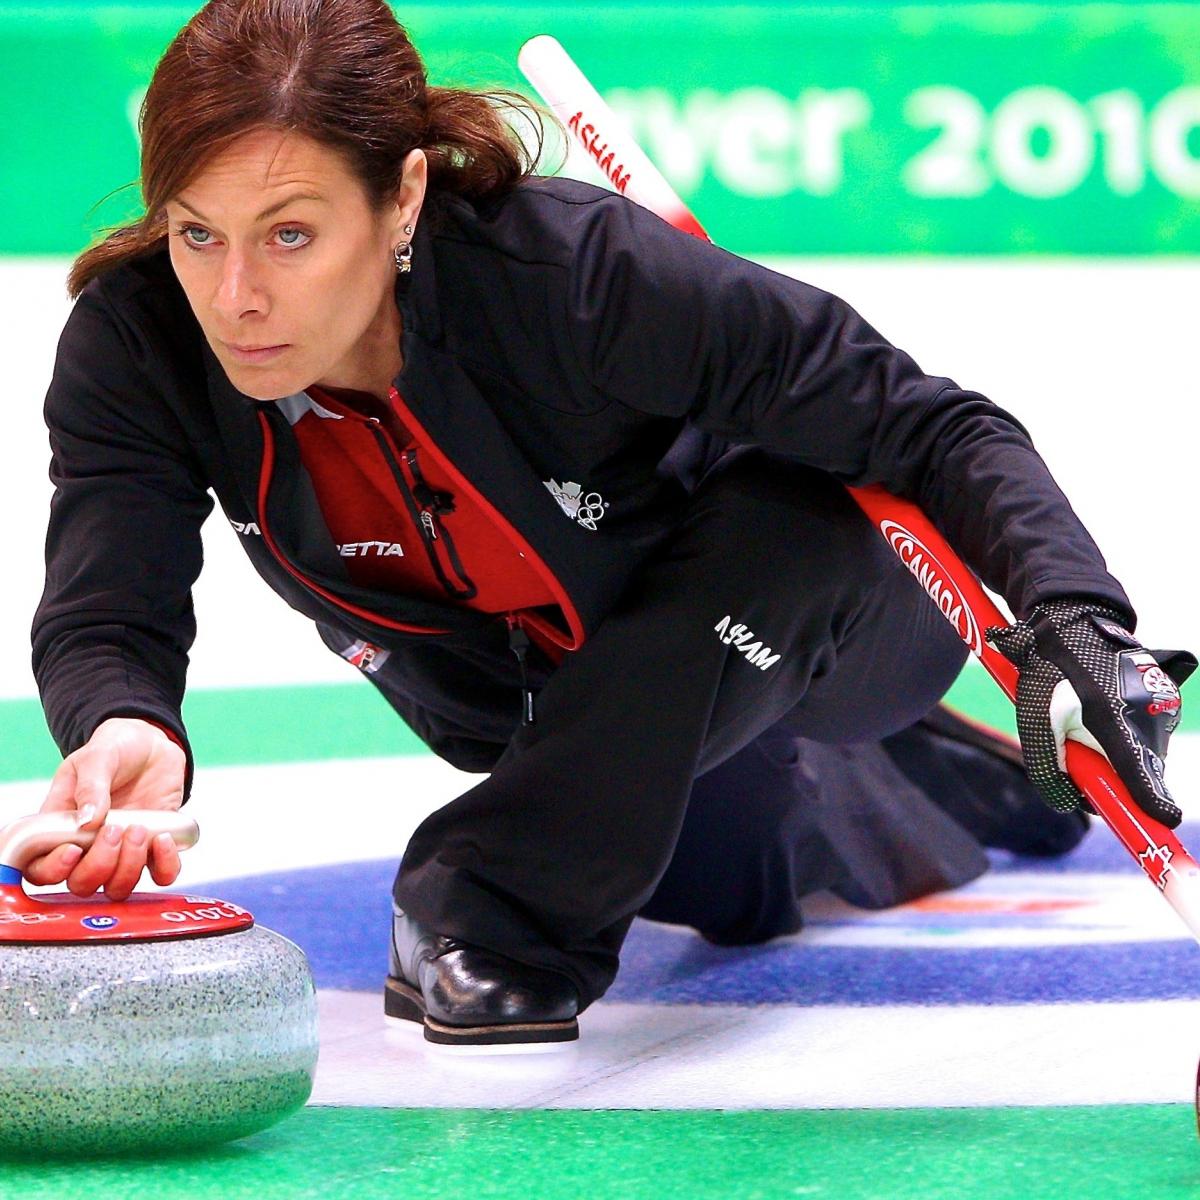 The internet is in love with the Norwegian curlers wearing